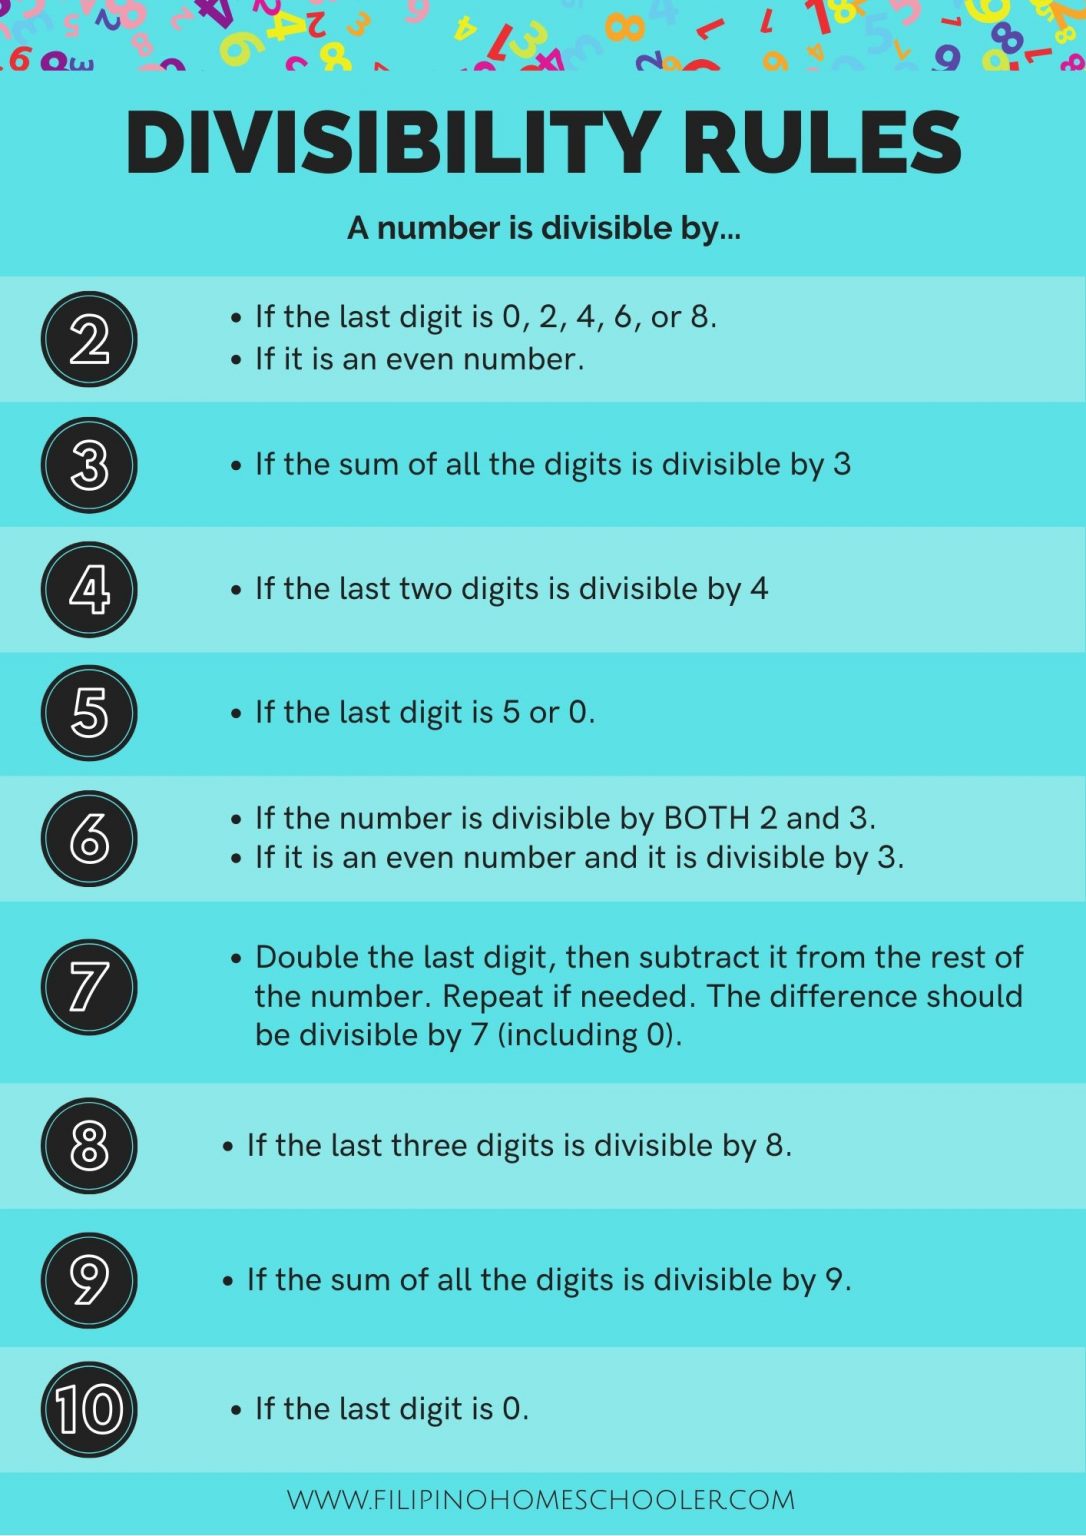 my-math-resources-divisibility-rules-poster